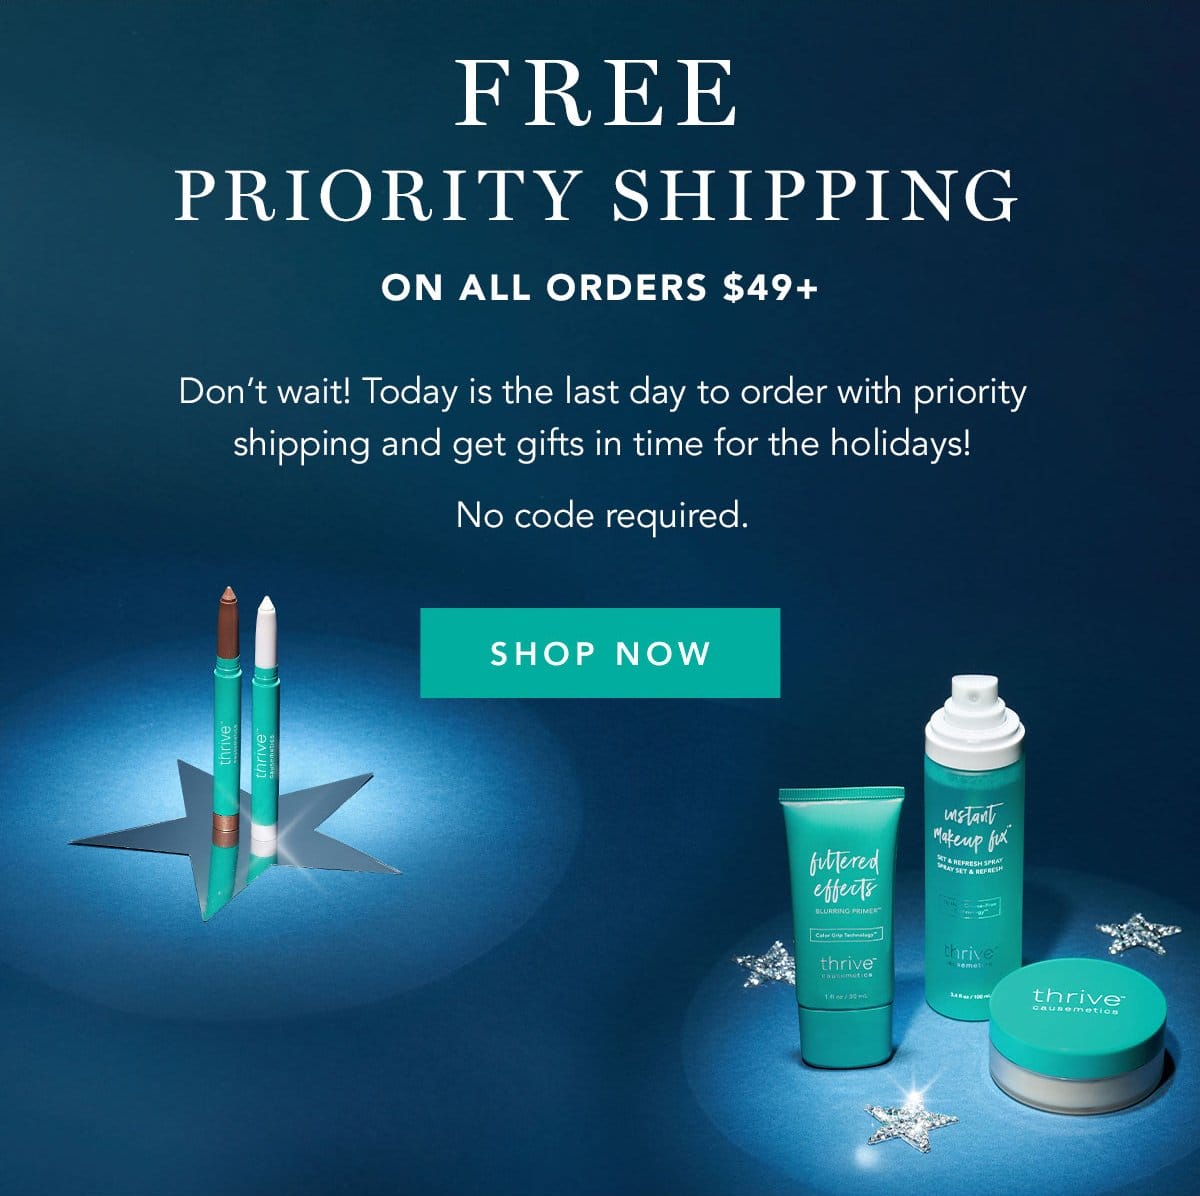 FREE Priority Shipping